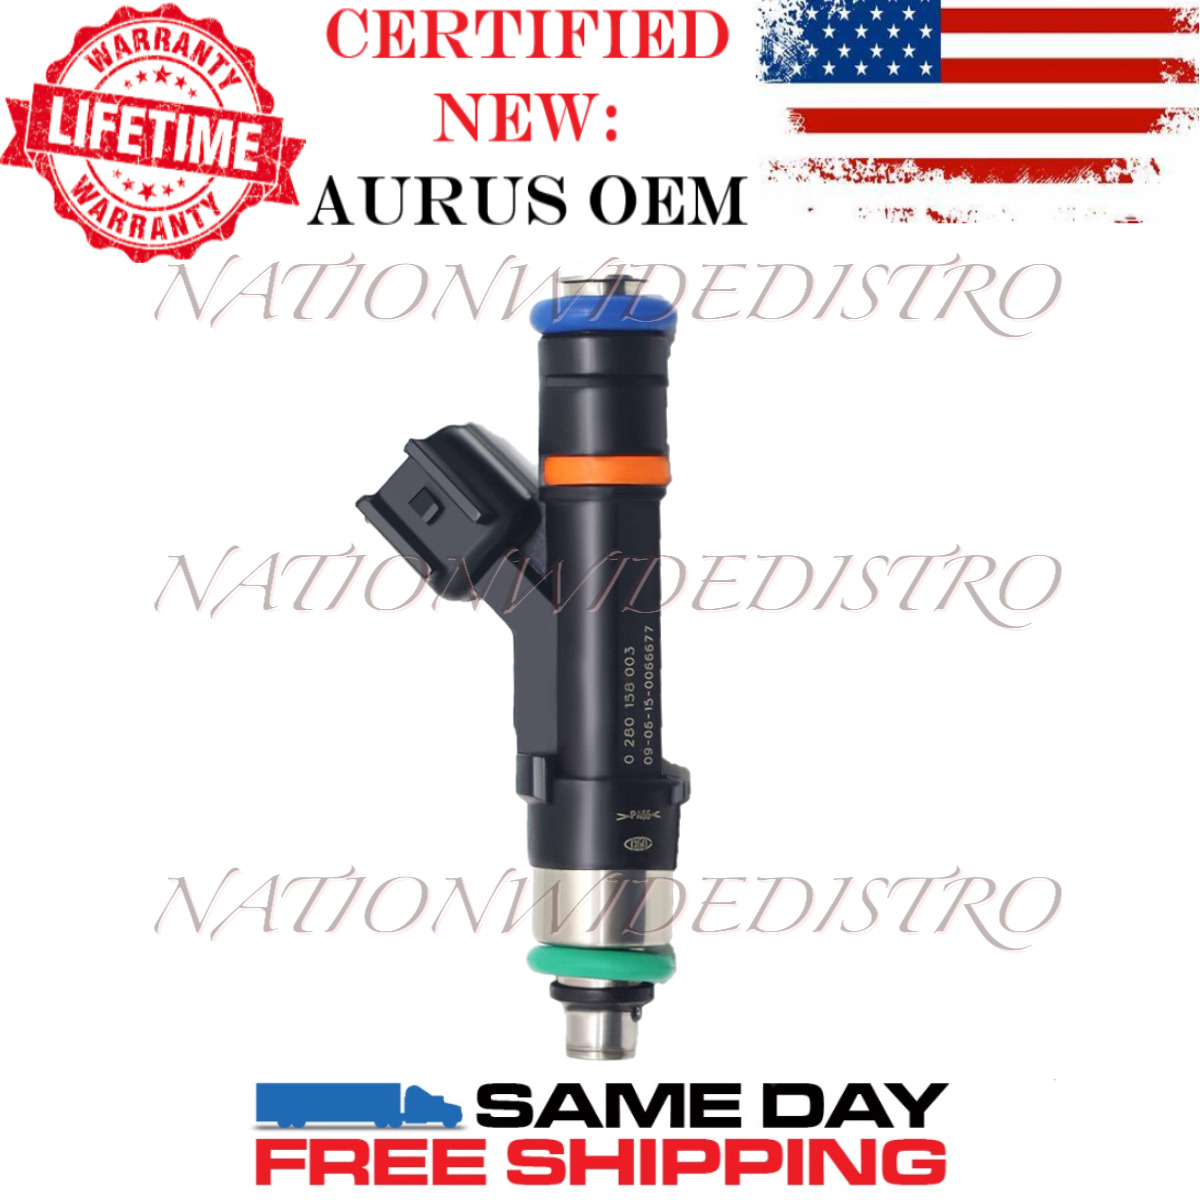 1x OEM NEW AURUS Fuel Injectos for 2004 Ford F-150 5.4L V8 0280158003